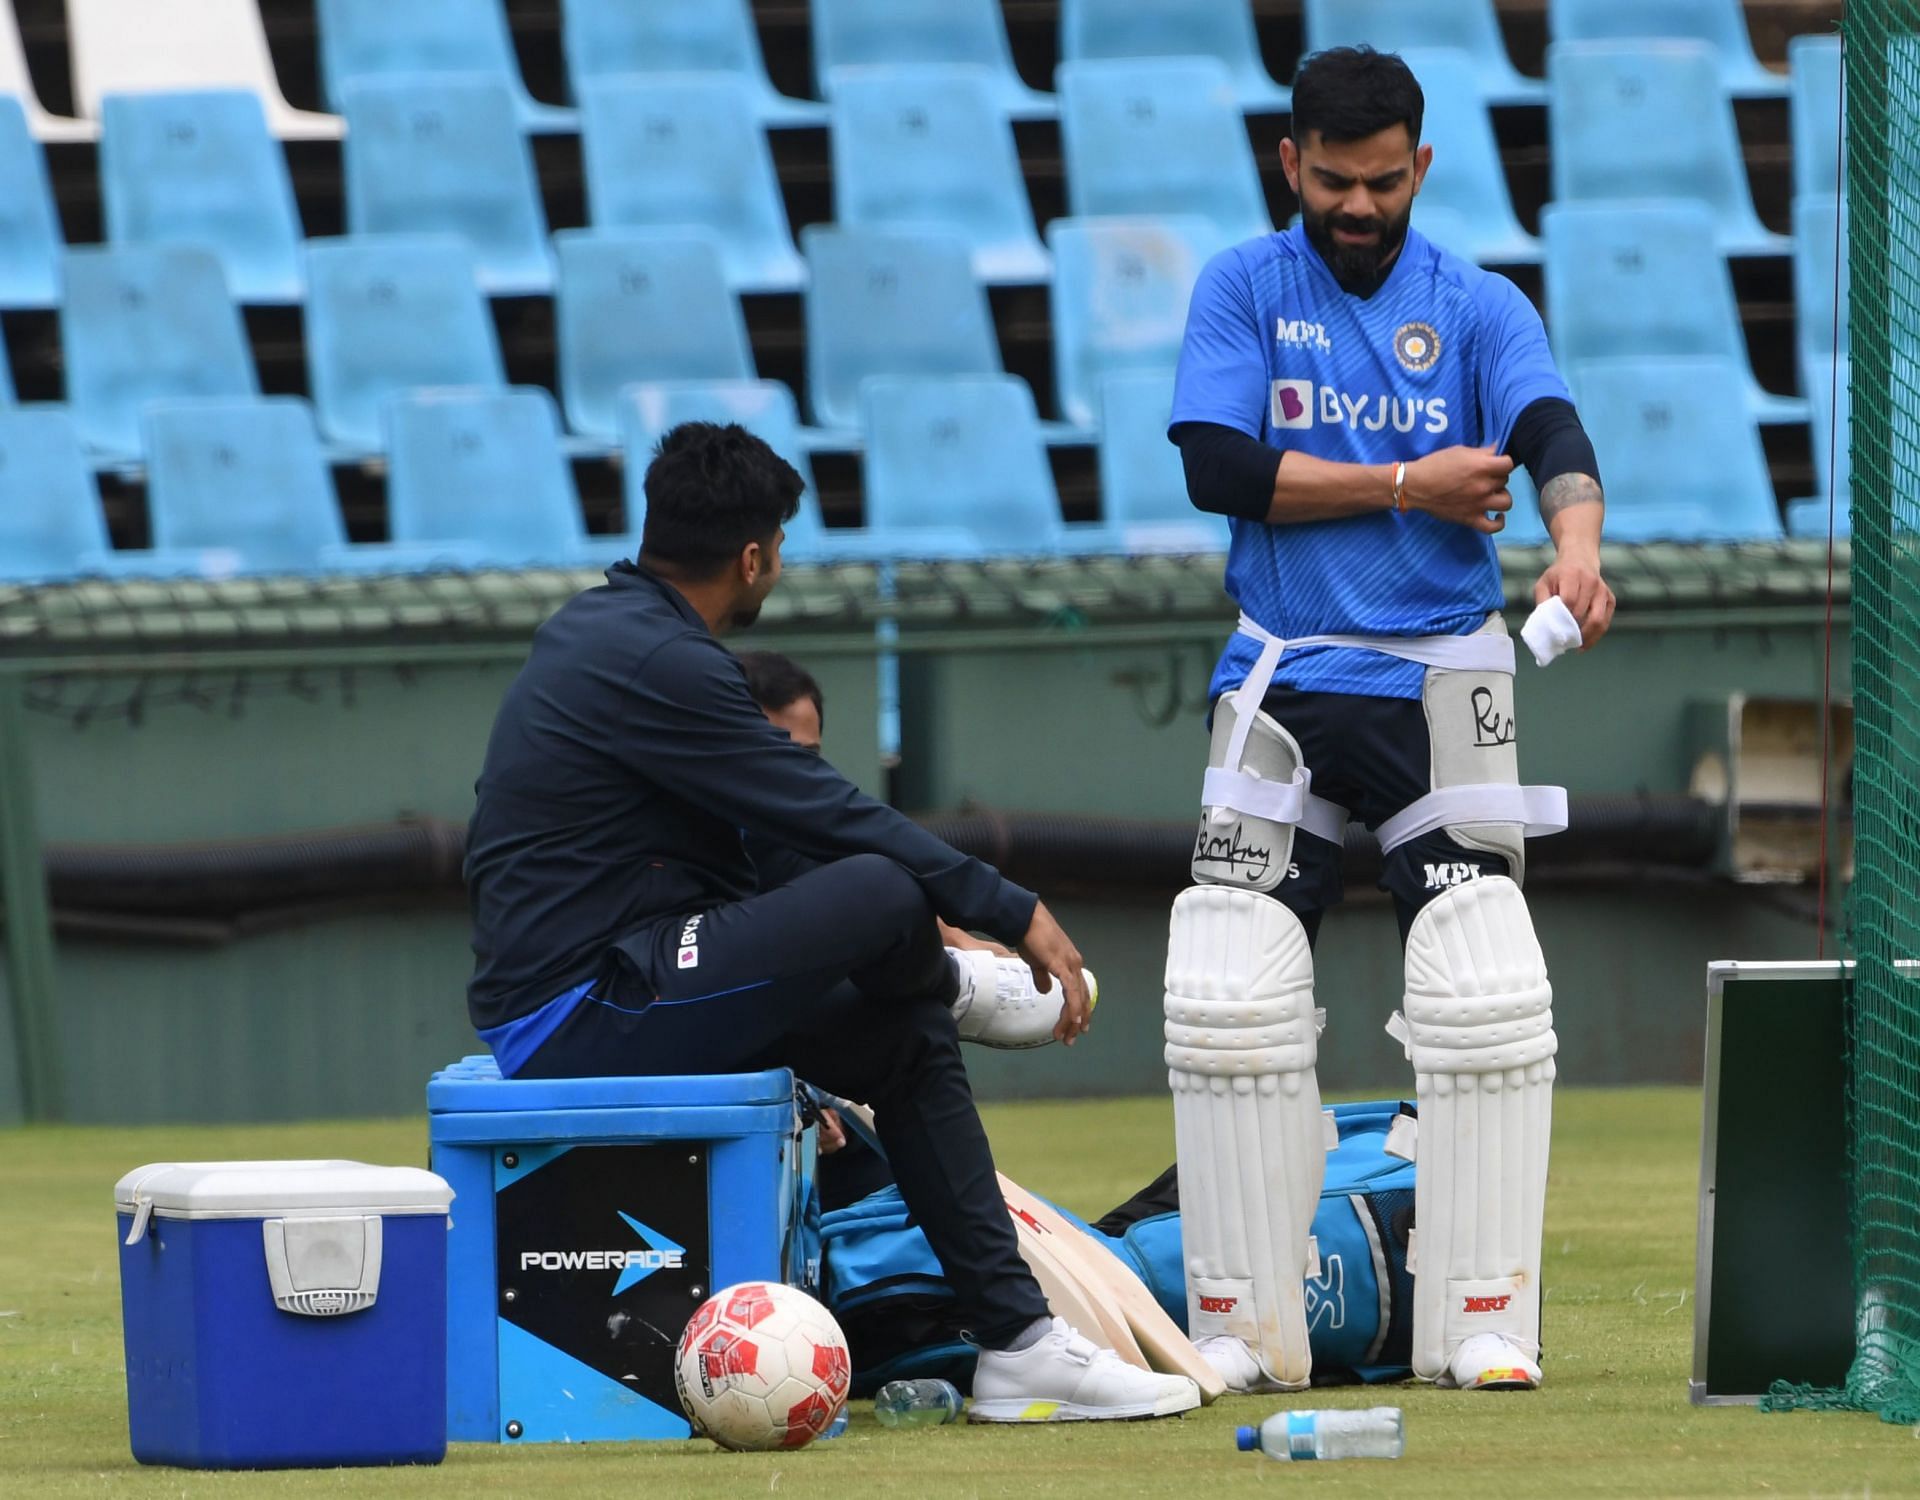 India Tour to South Africa: India Practice Session